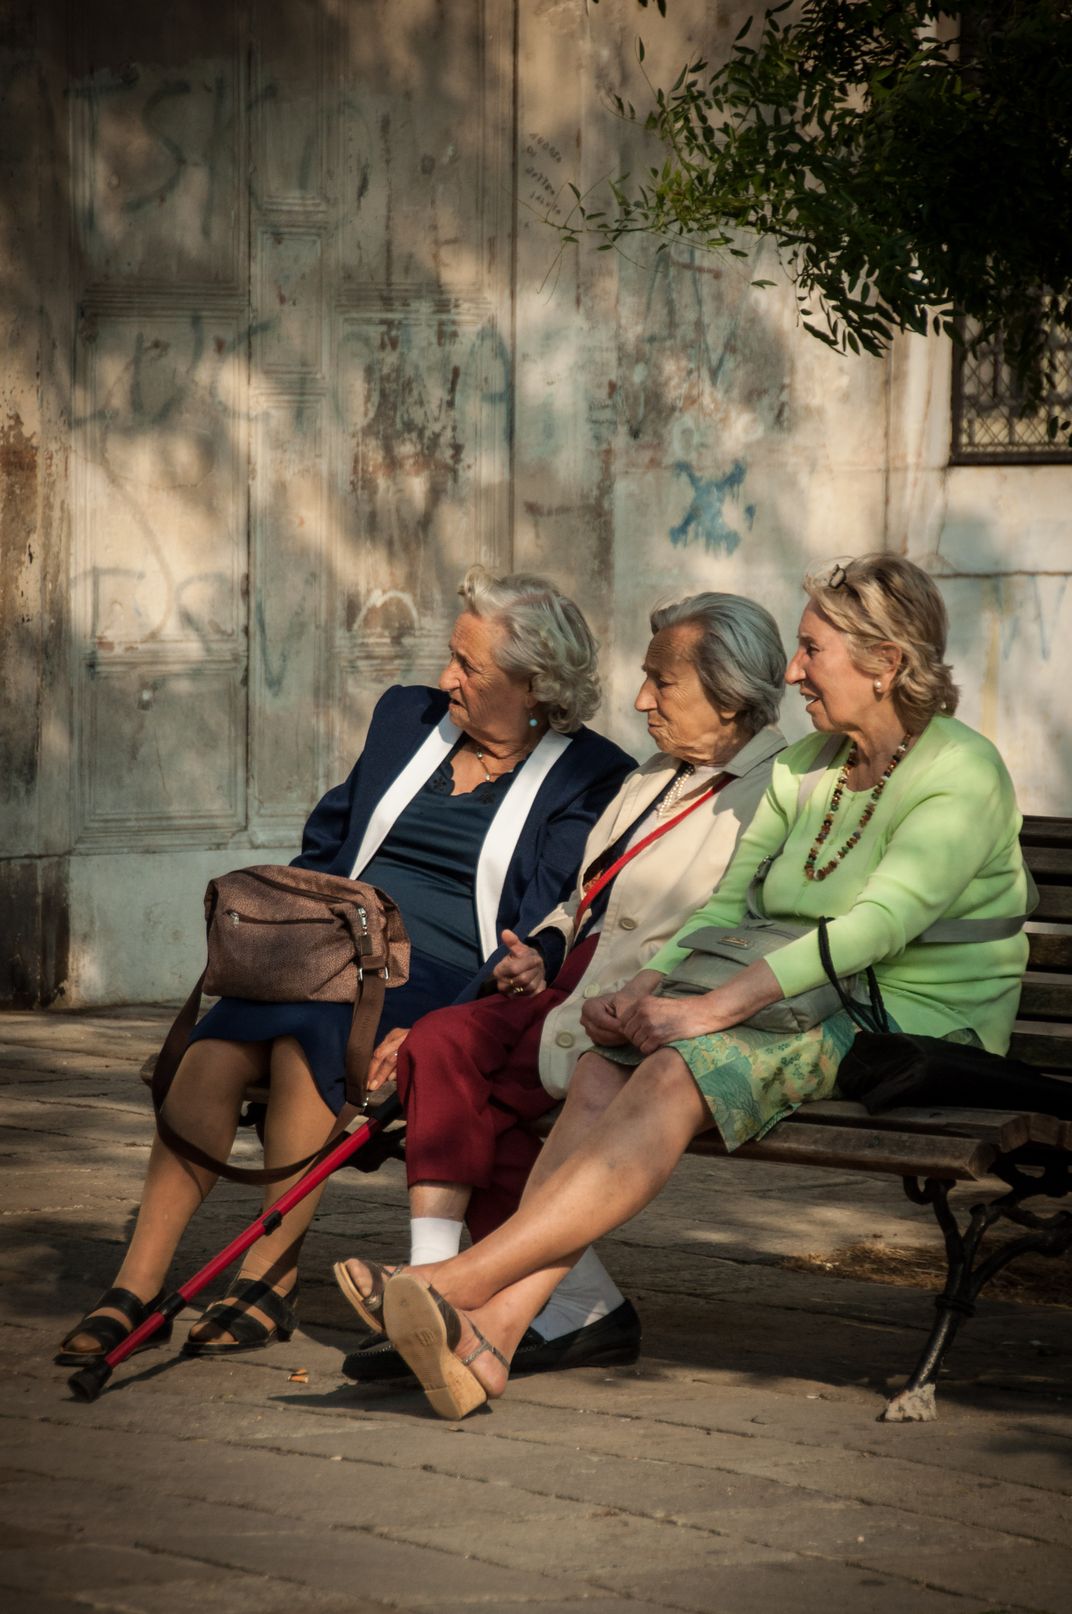 Siesta.........Spanish afternoon in Italy | Smithsonian Photo Contest ...